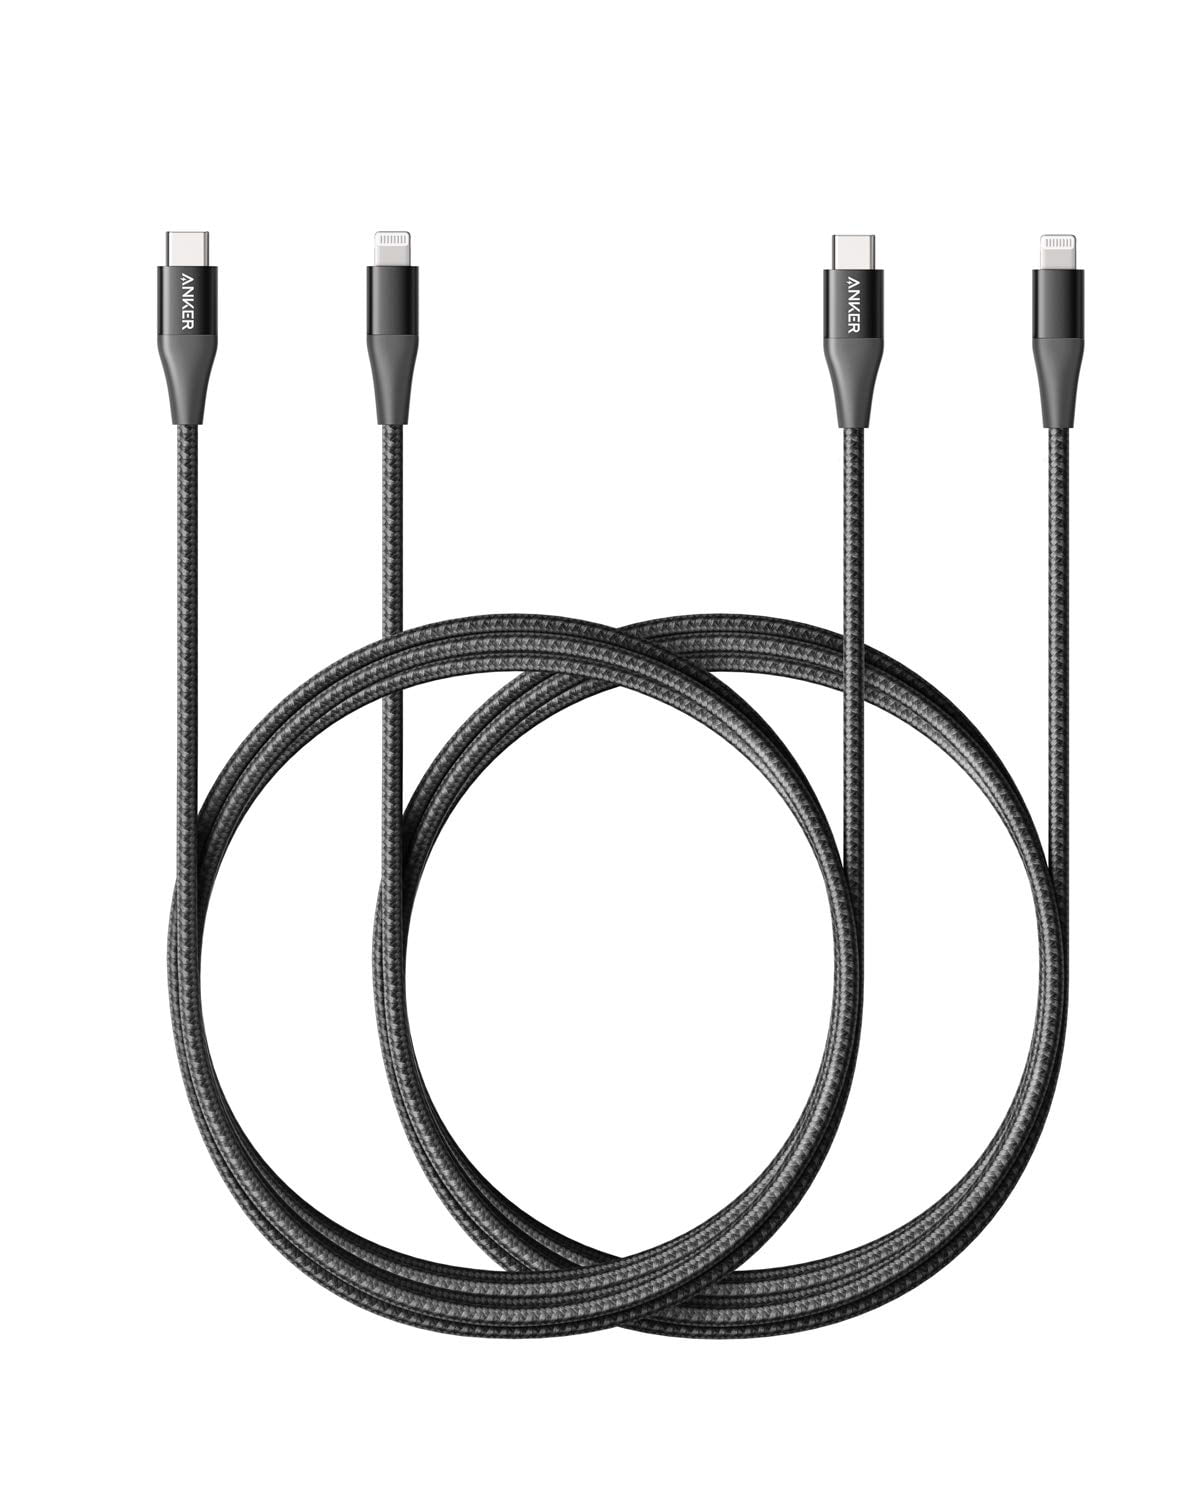 Bende karton staking Anker USB C to Lightning Cable [6 ft, 2-Pack] Powerline+ II Nylon Braided  Cable, Supports Power Delivery (Black) - Walmart.com